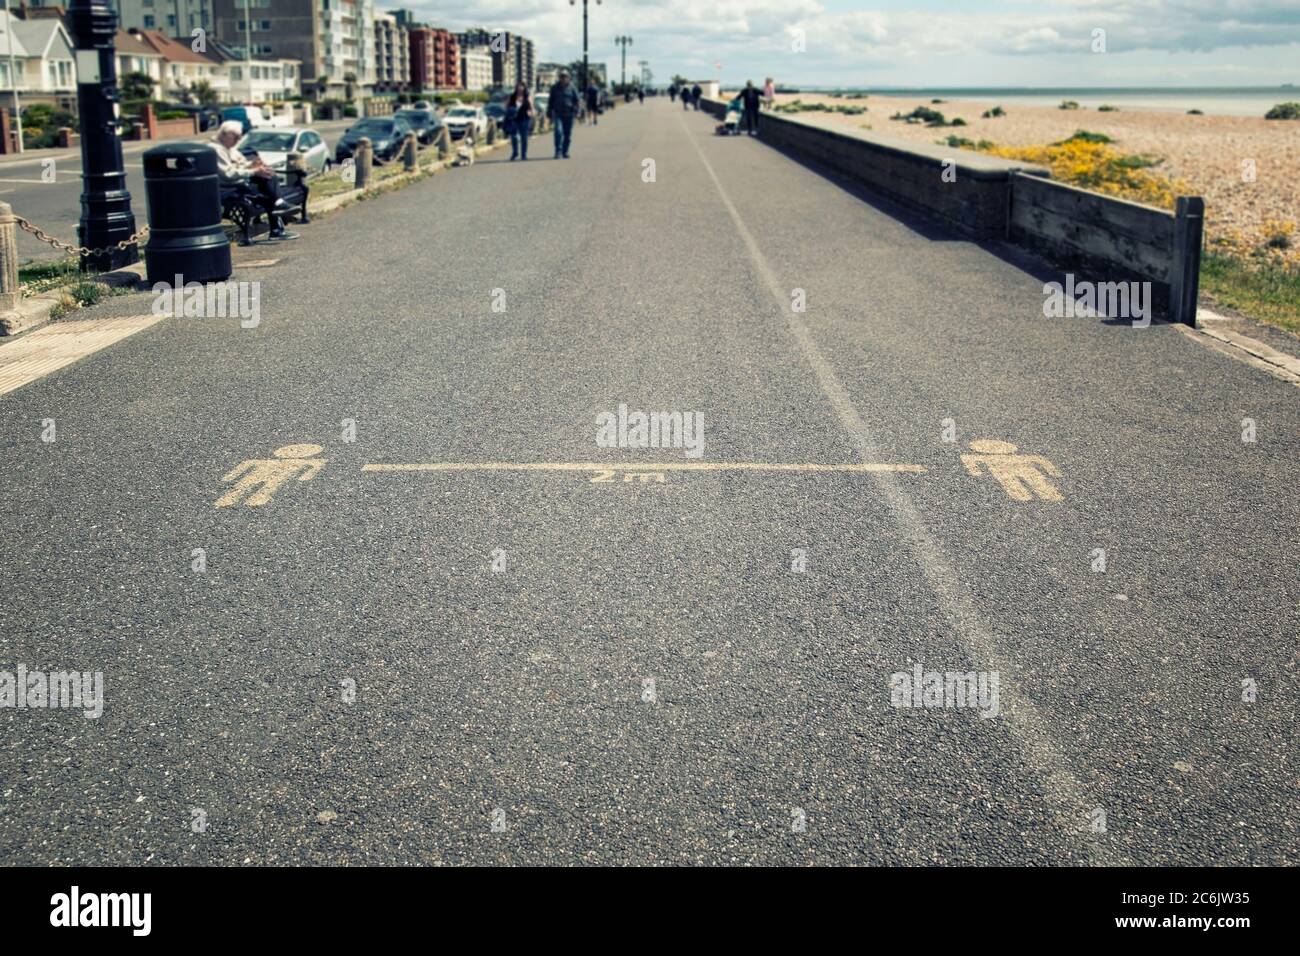 2-meter markings on the pavement as a safety measure during the COVID-19 pandemic 2020. Stock Photo